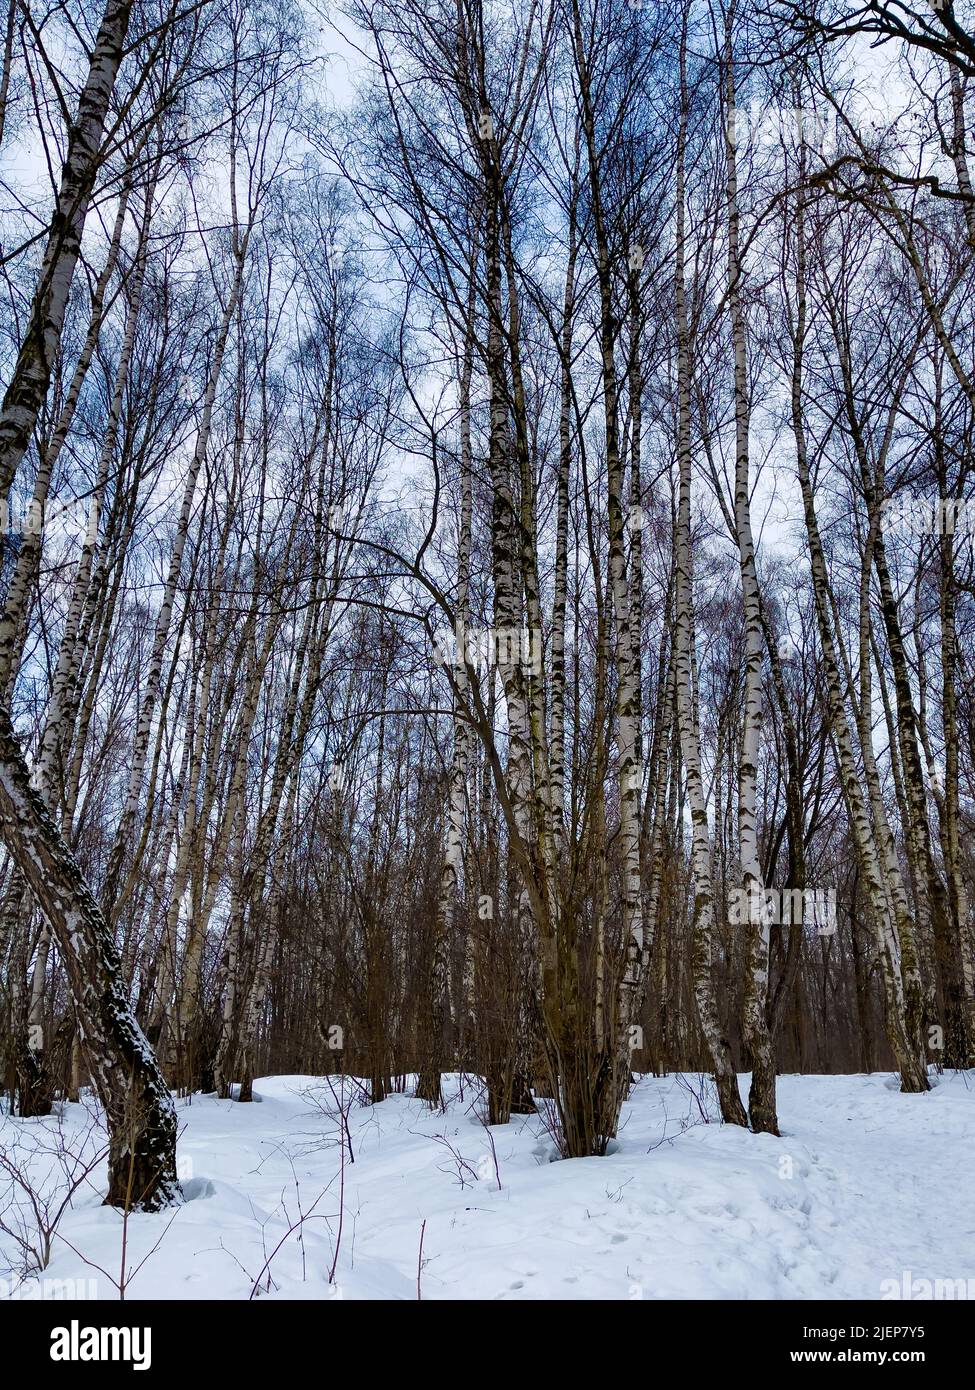 Winter landscape with snowy birch trees in the park Stock Photo